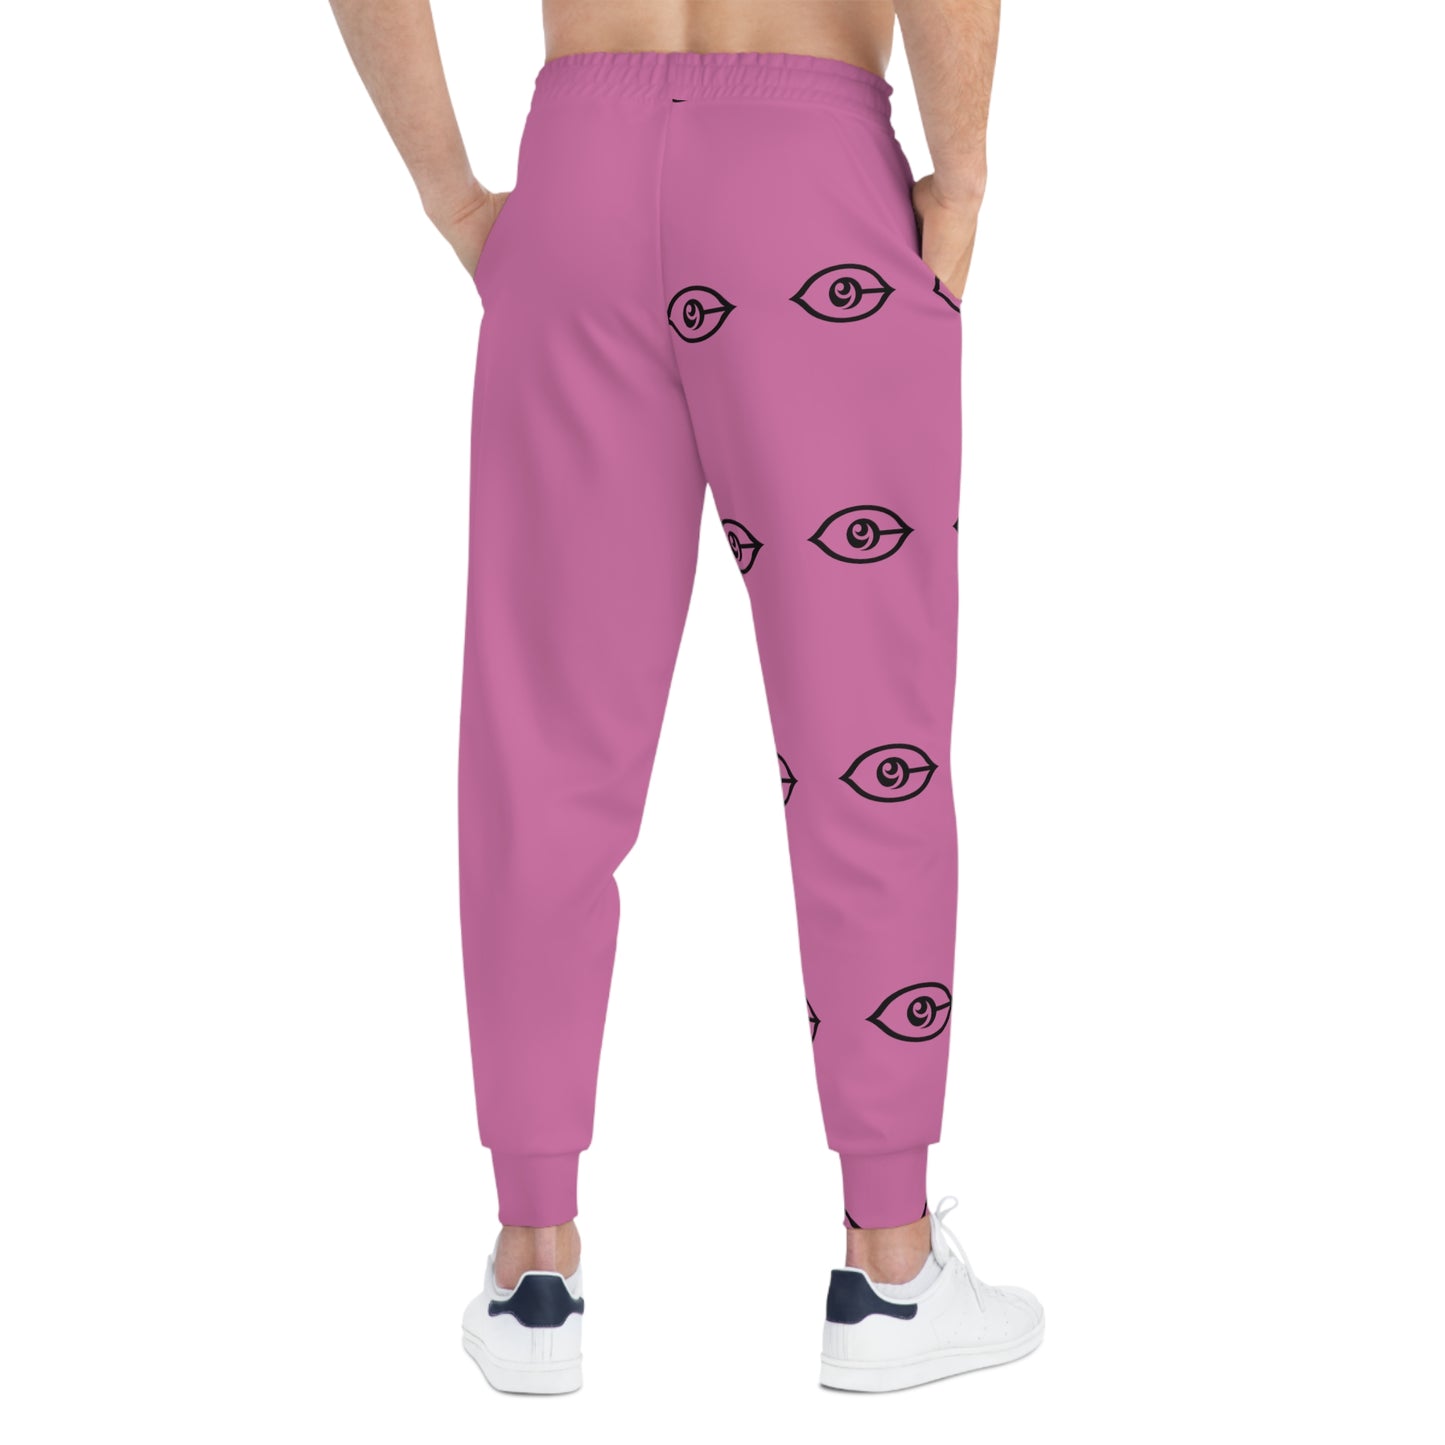 CyVision Peaceful Warrior Athletic Joggers